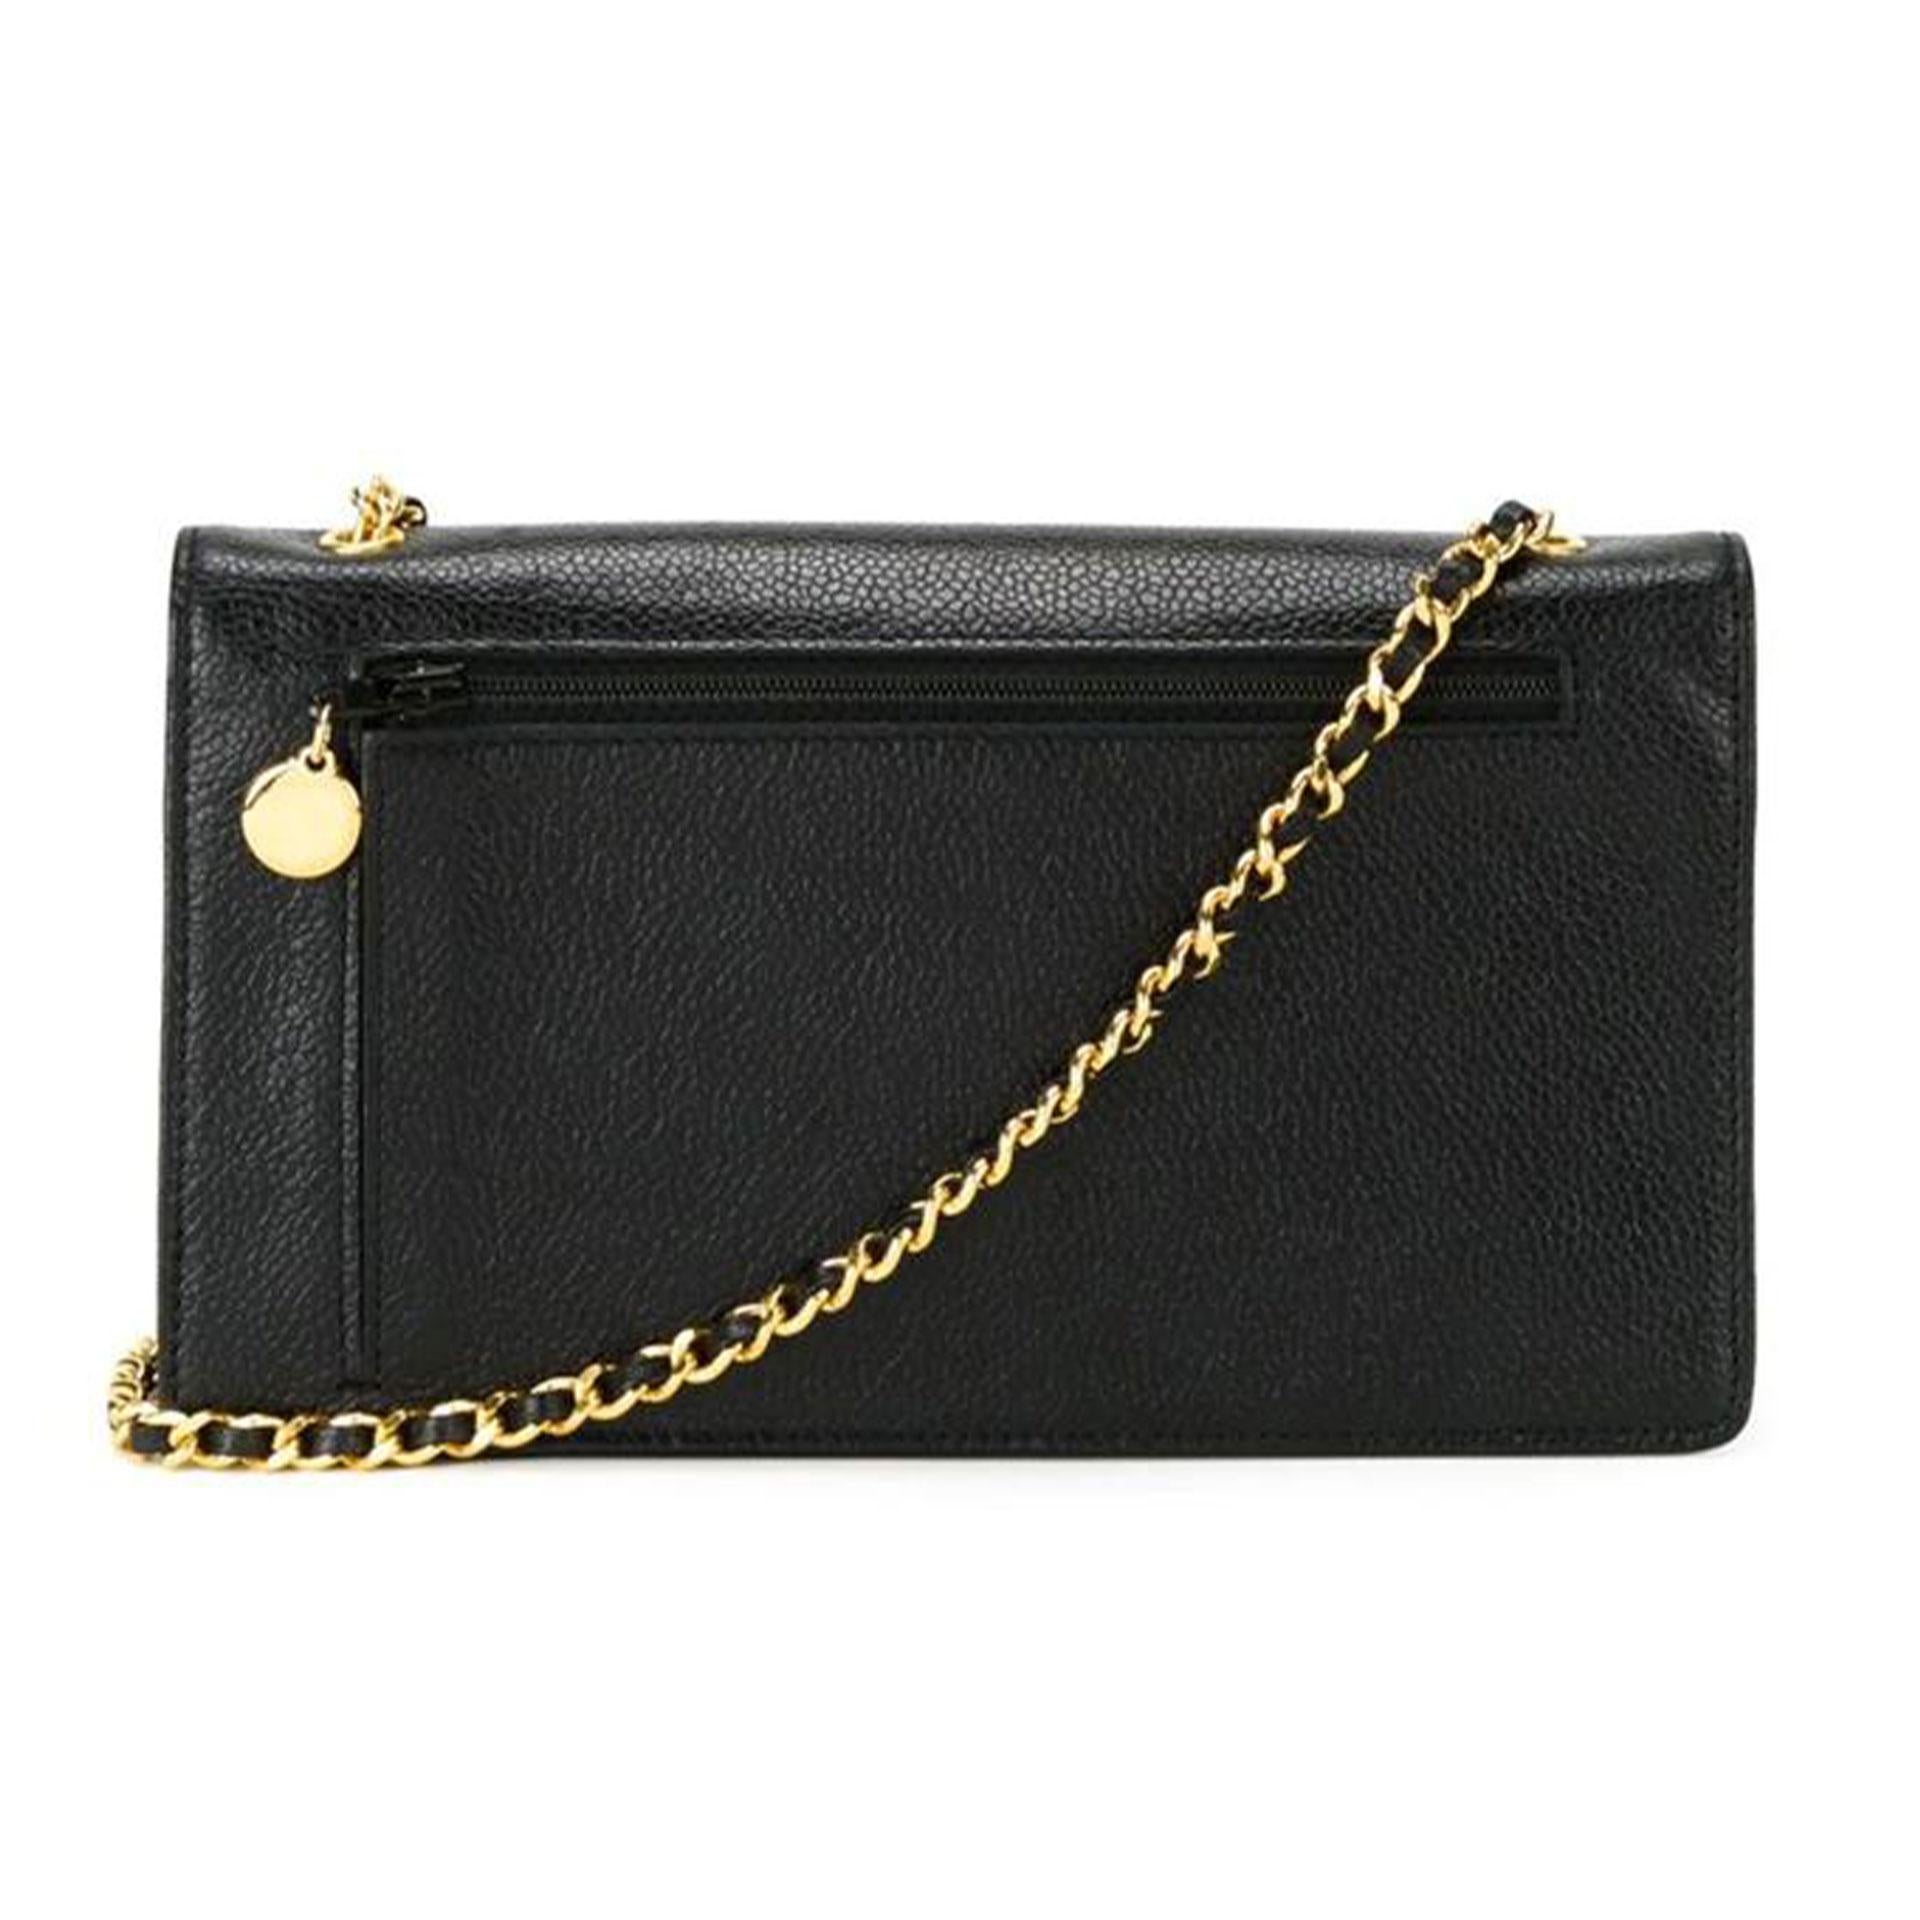 Chanel 1996 Vintage Woc Wallet On A Chain Black Calfskin Leather Cross Body Bag In Good Condition For Sale In Miami, FL